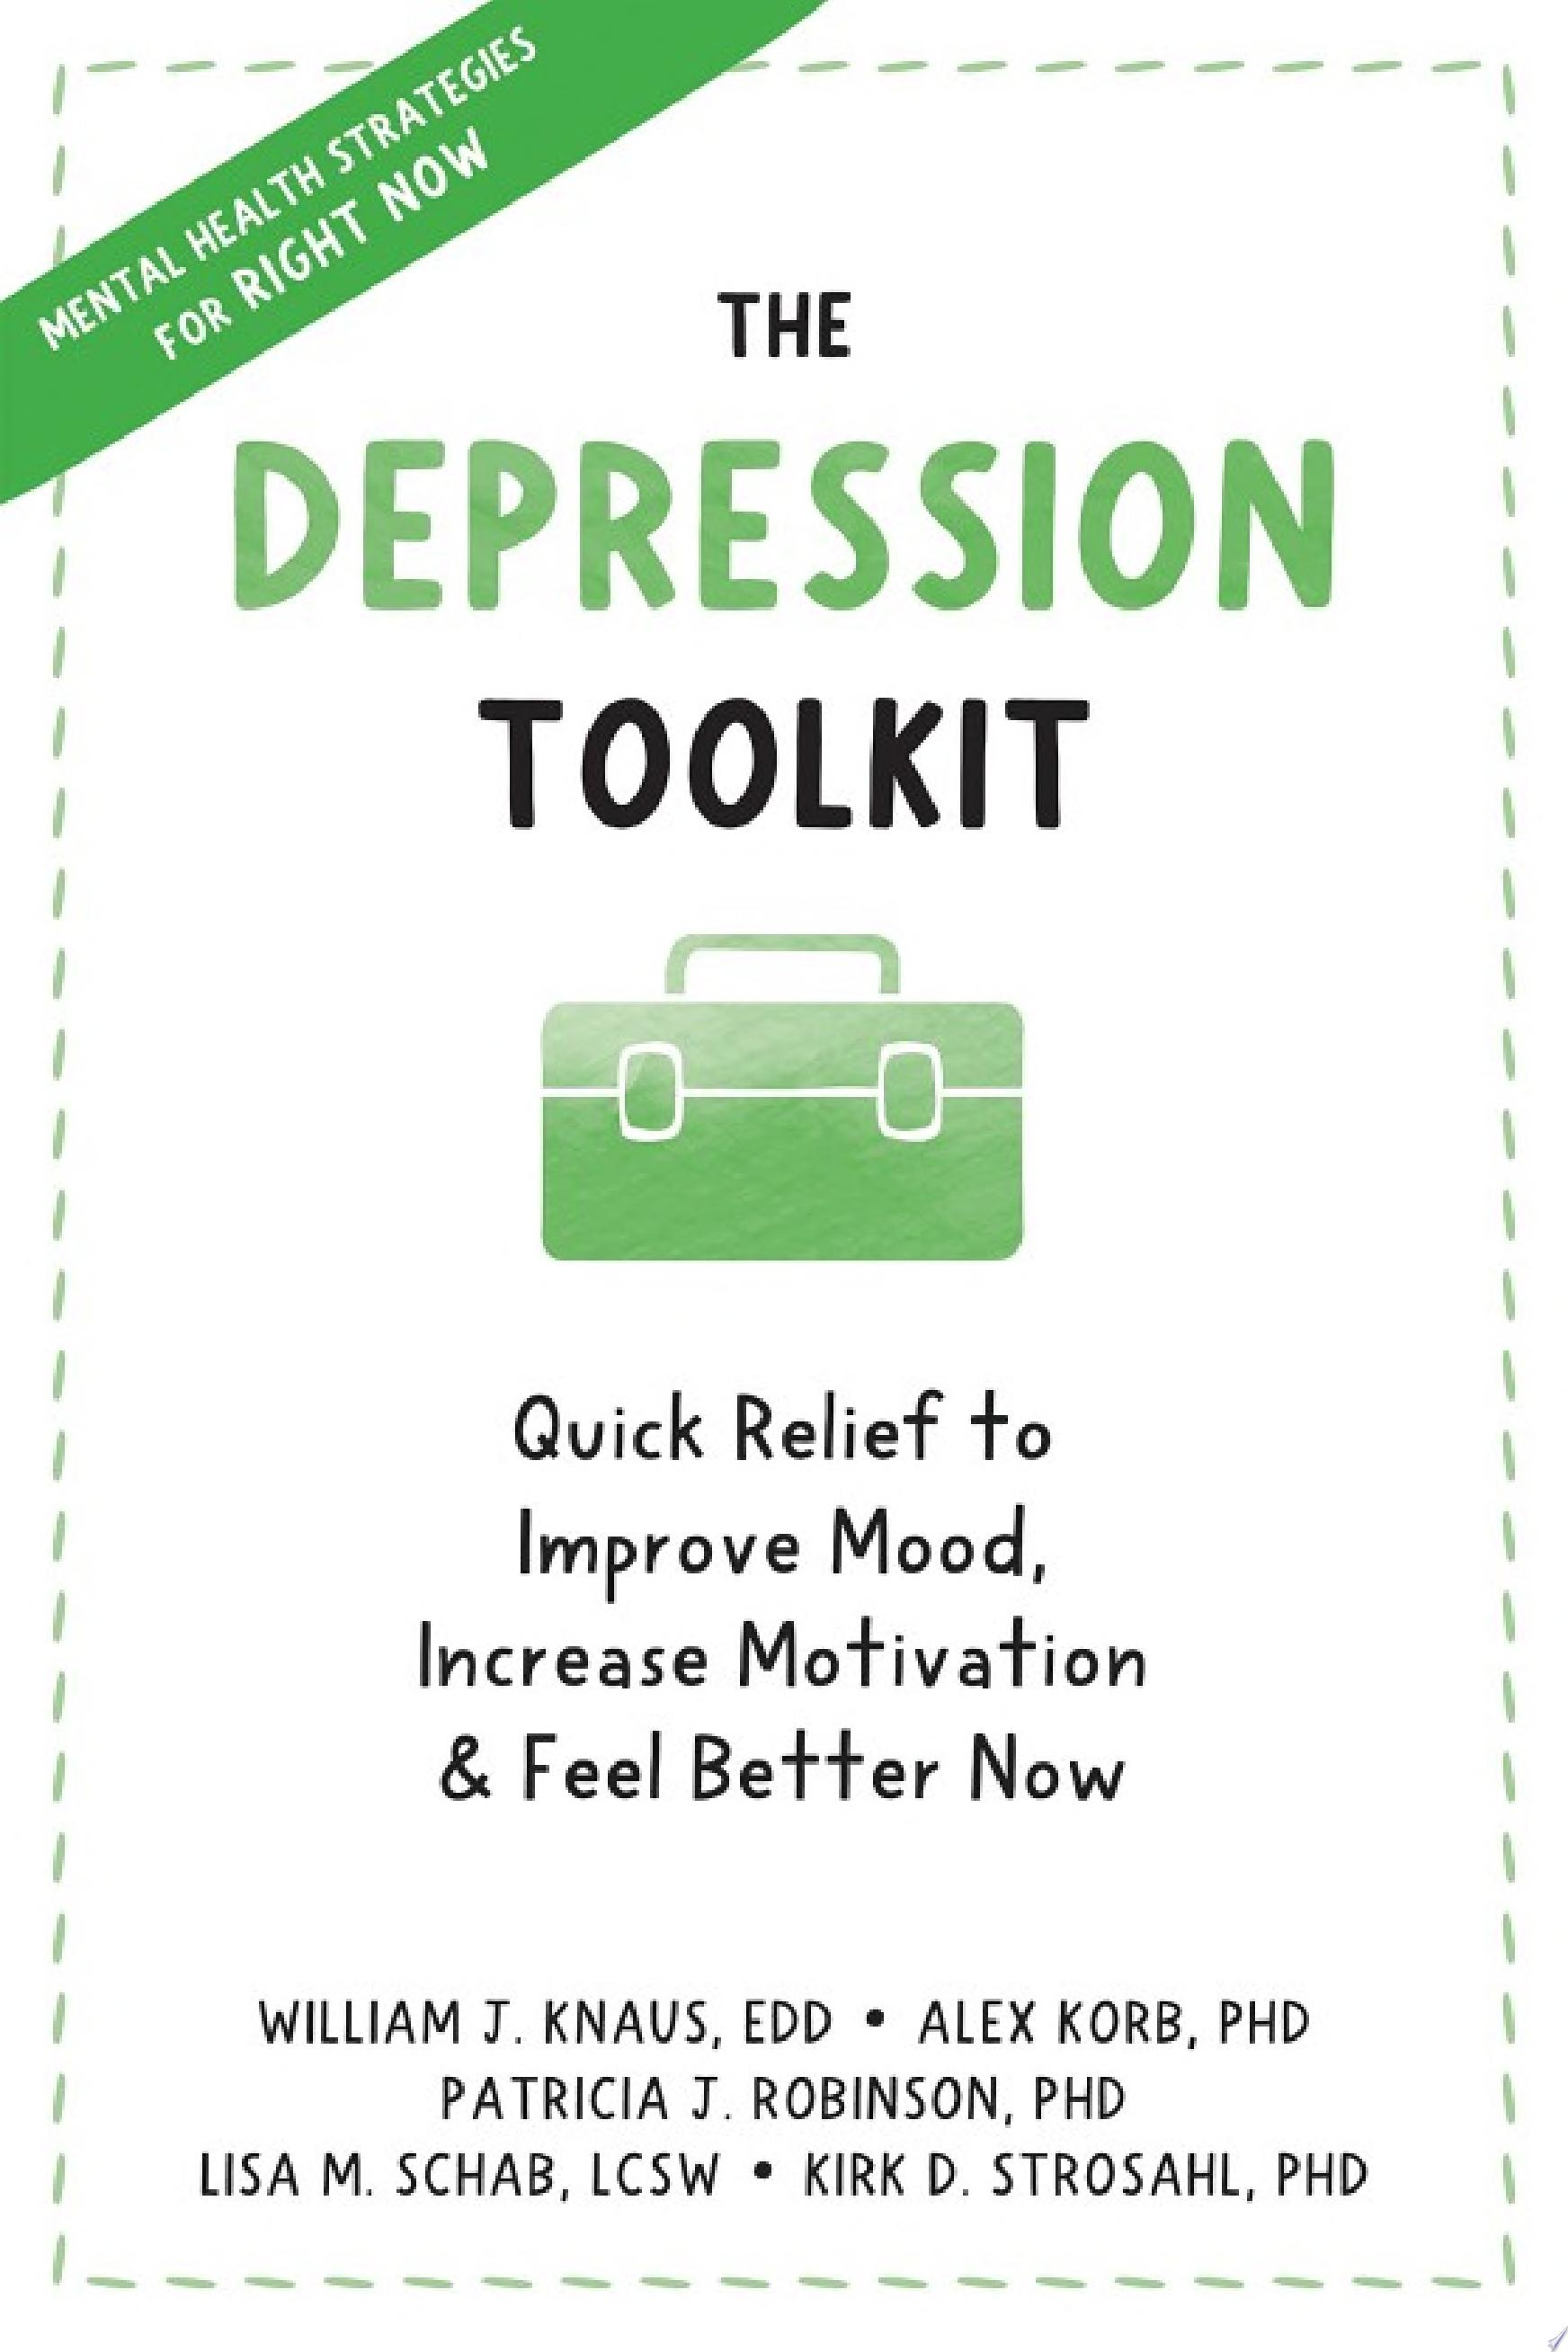 Image for "The Depression Toolkit"